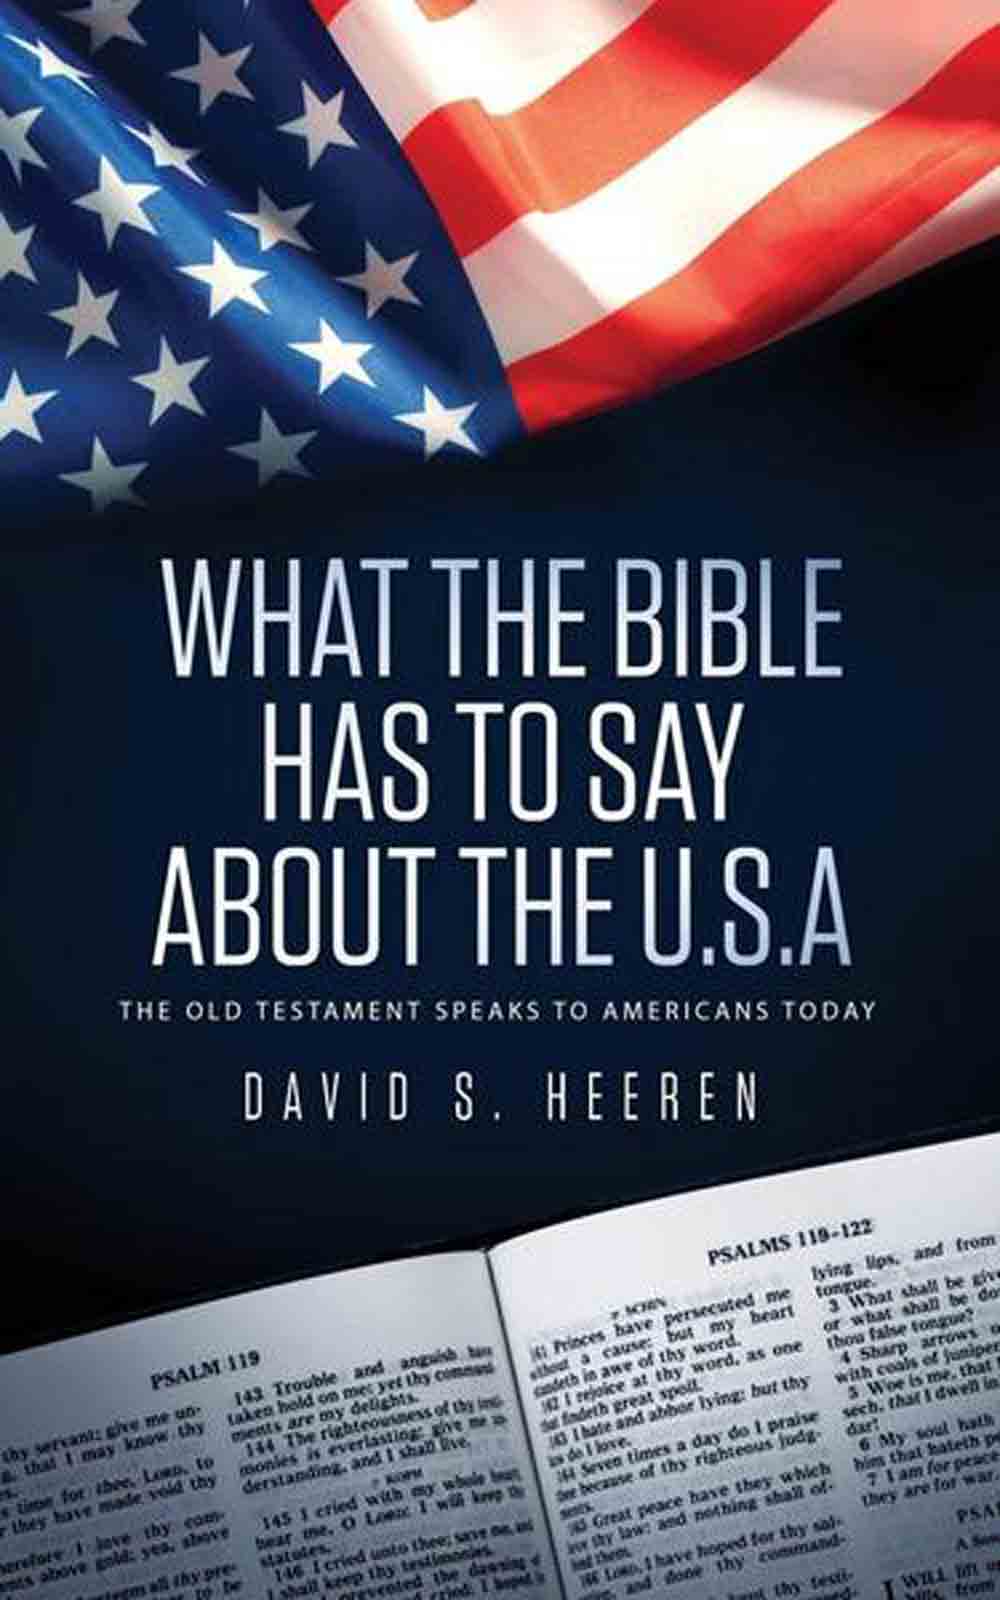 Anzeige: Lesetipps, Do Biblical End-Time Prophecies Have Anything Specific to Say About the USA?